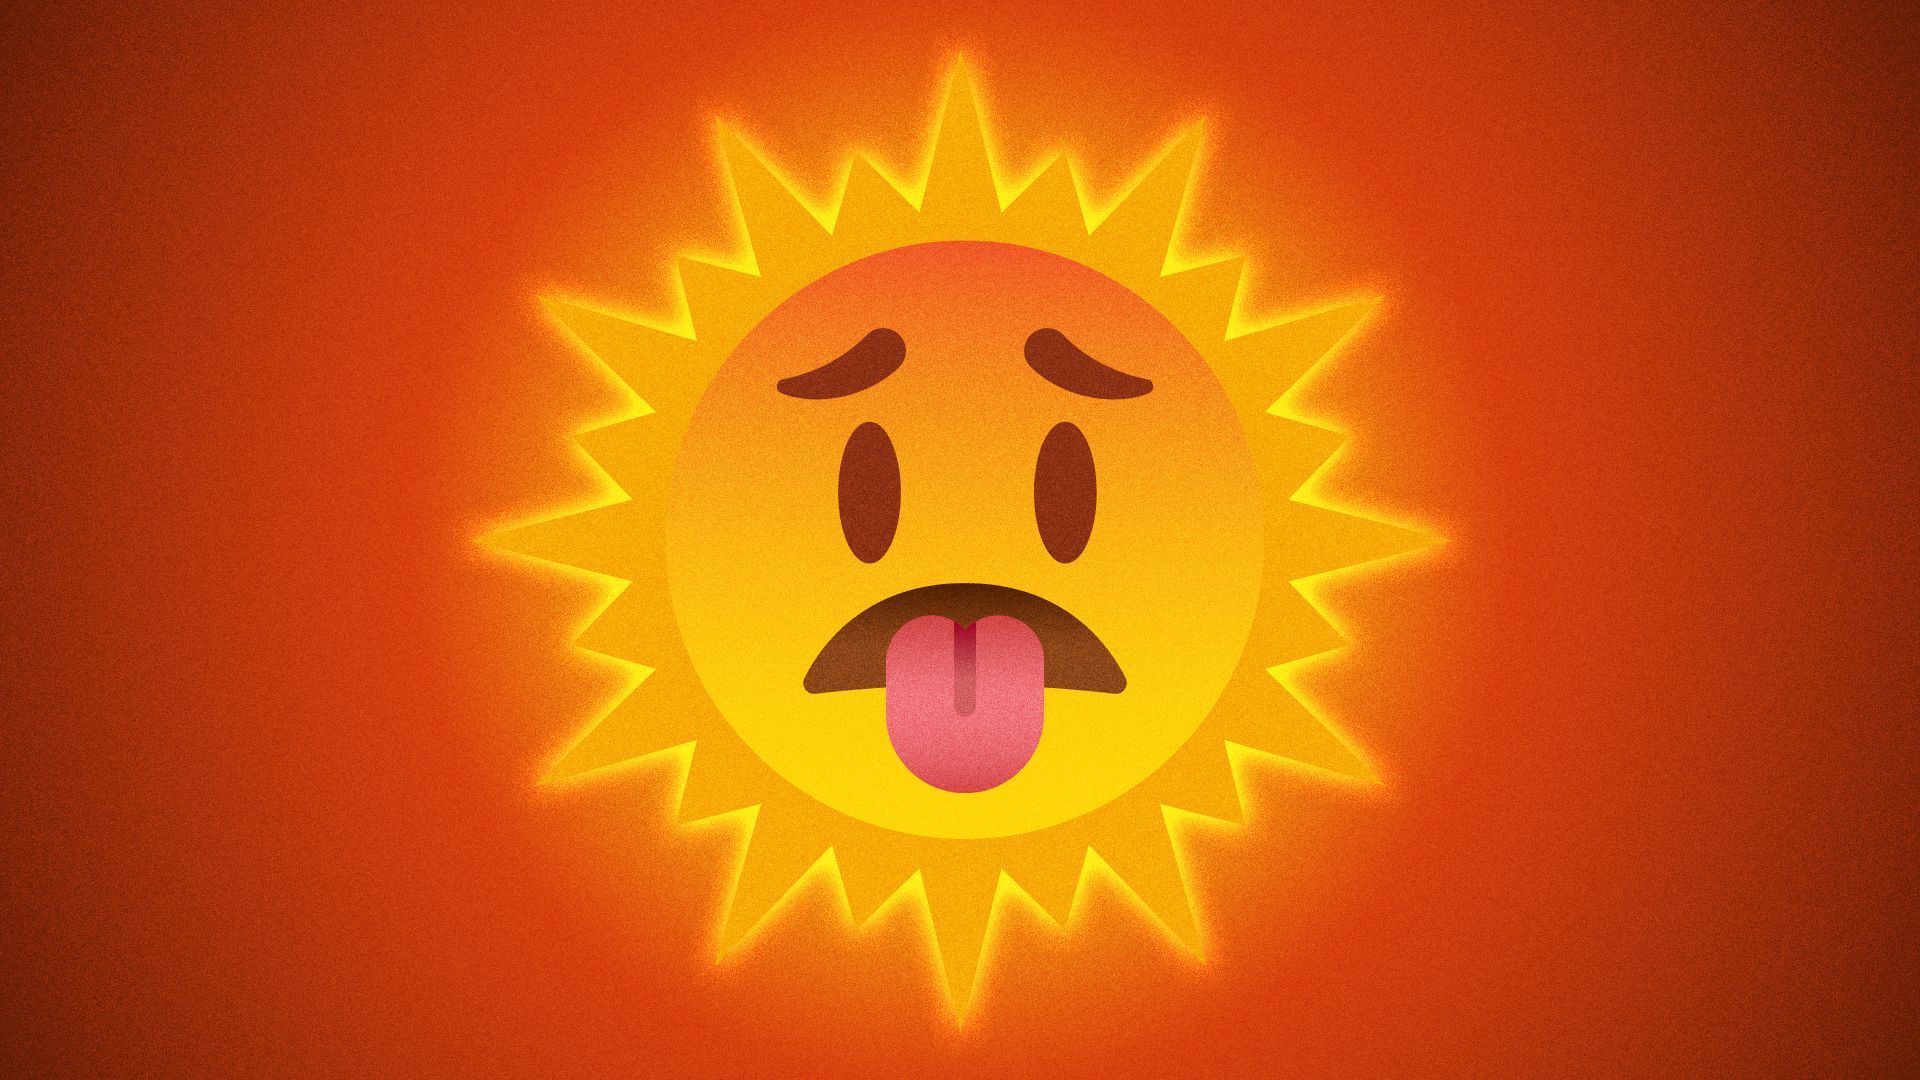 Illustration of the hot emoji as a sun.